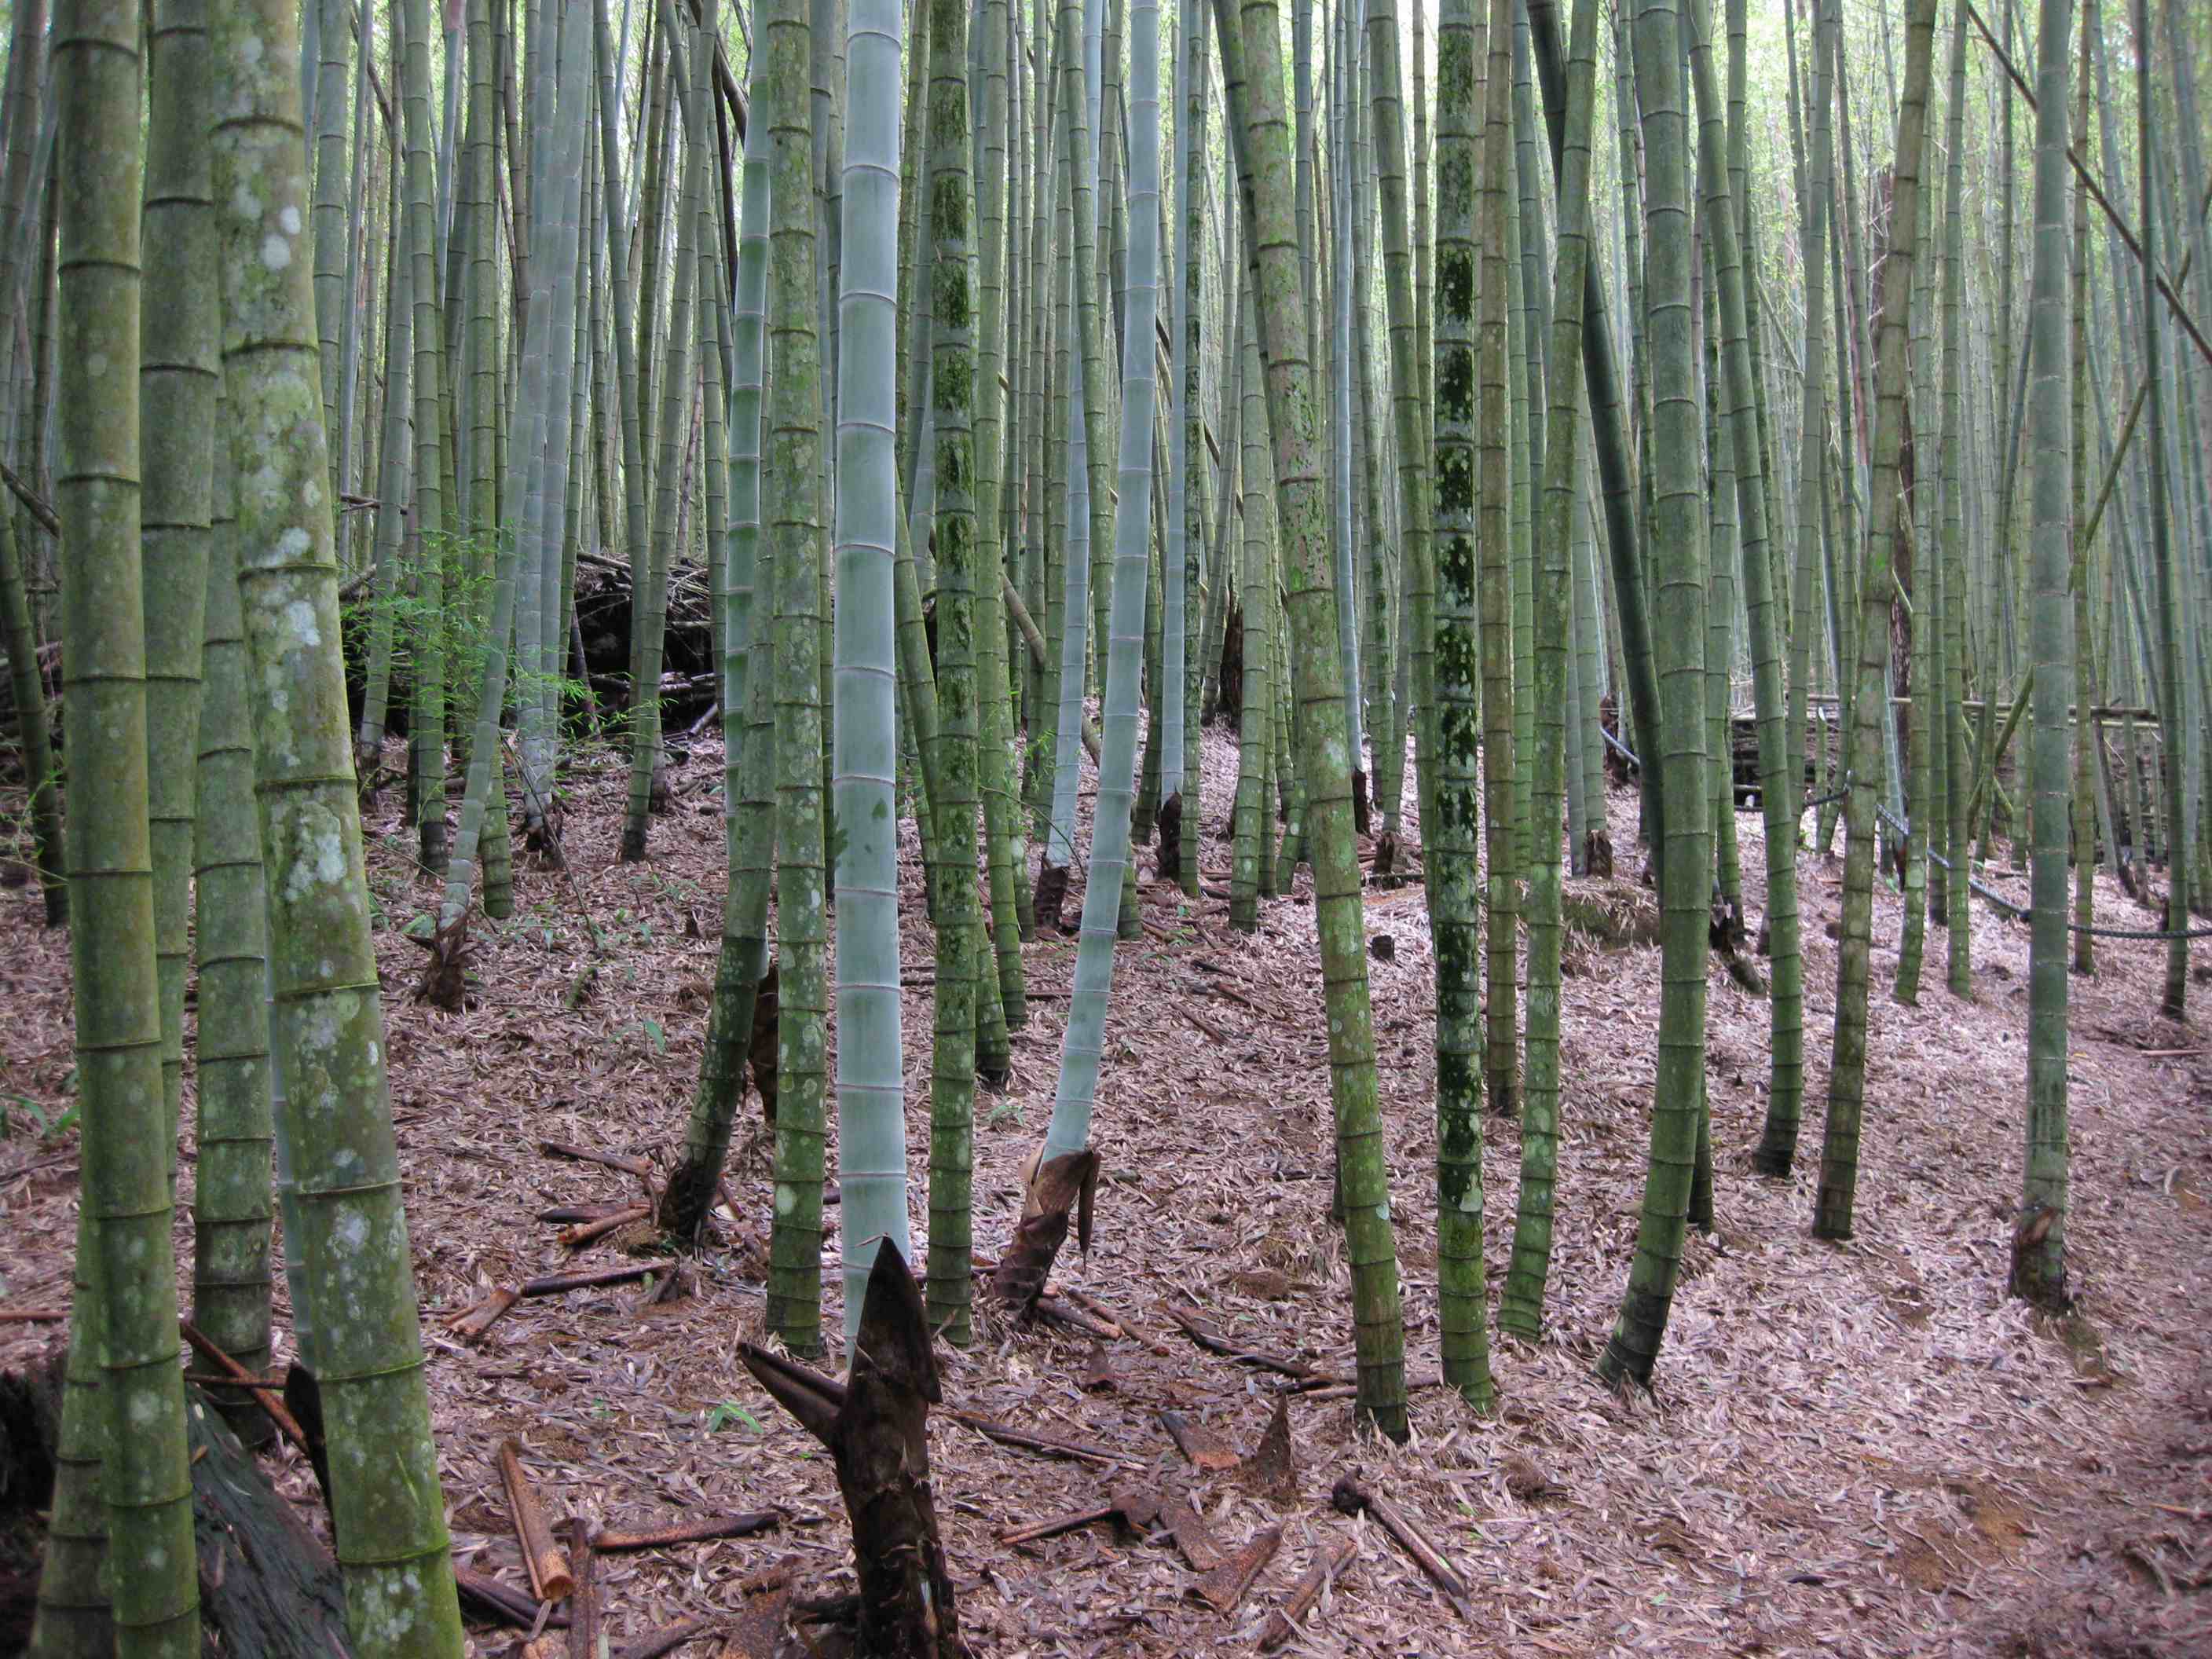 Bamboo forest in Taiwan